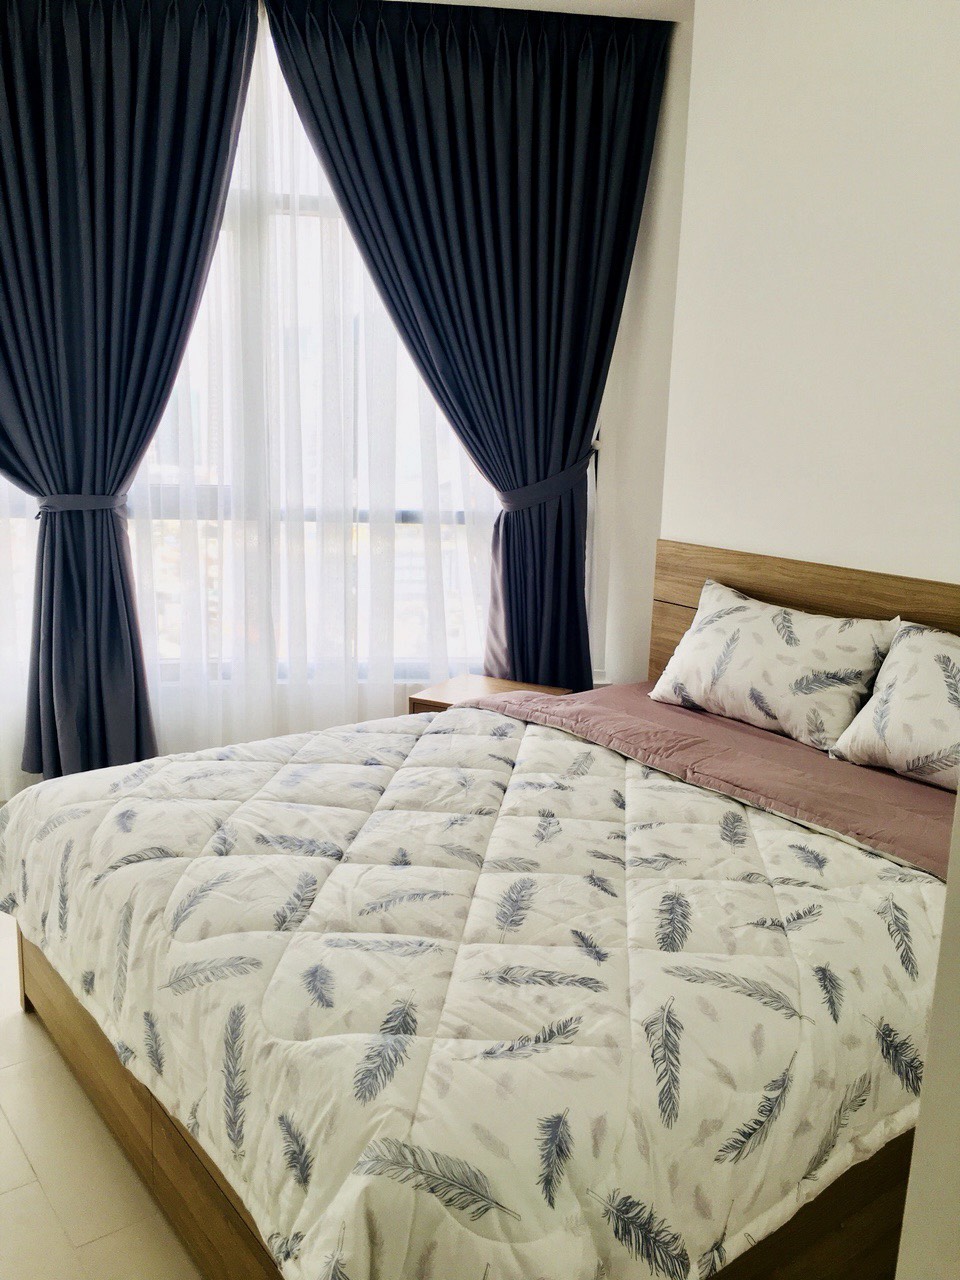 City Garden apartment for rent, new tower, fully furnished 